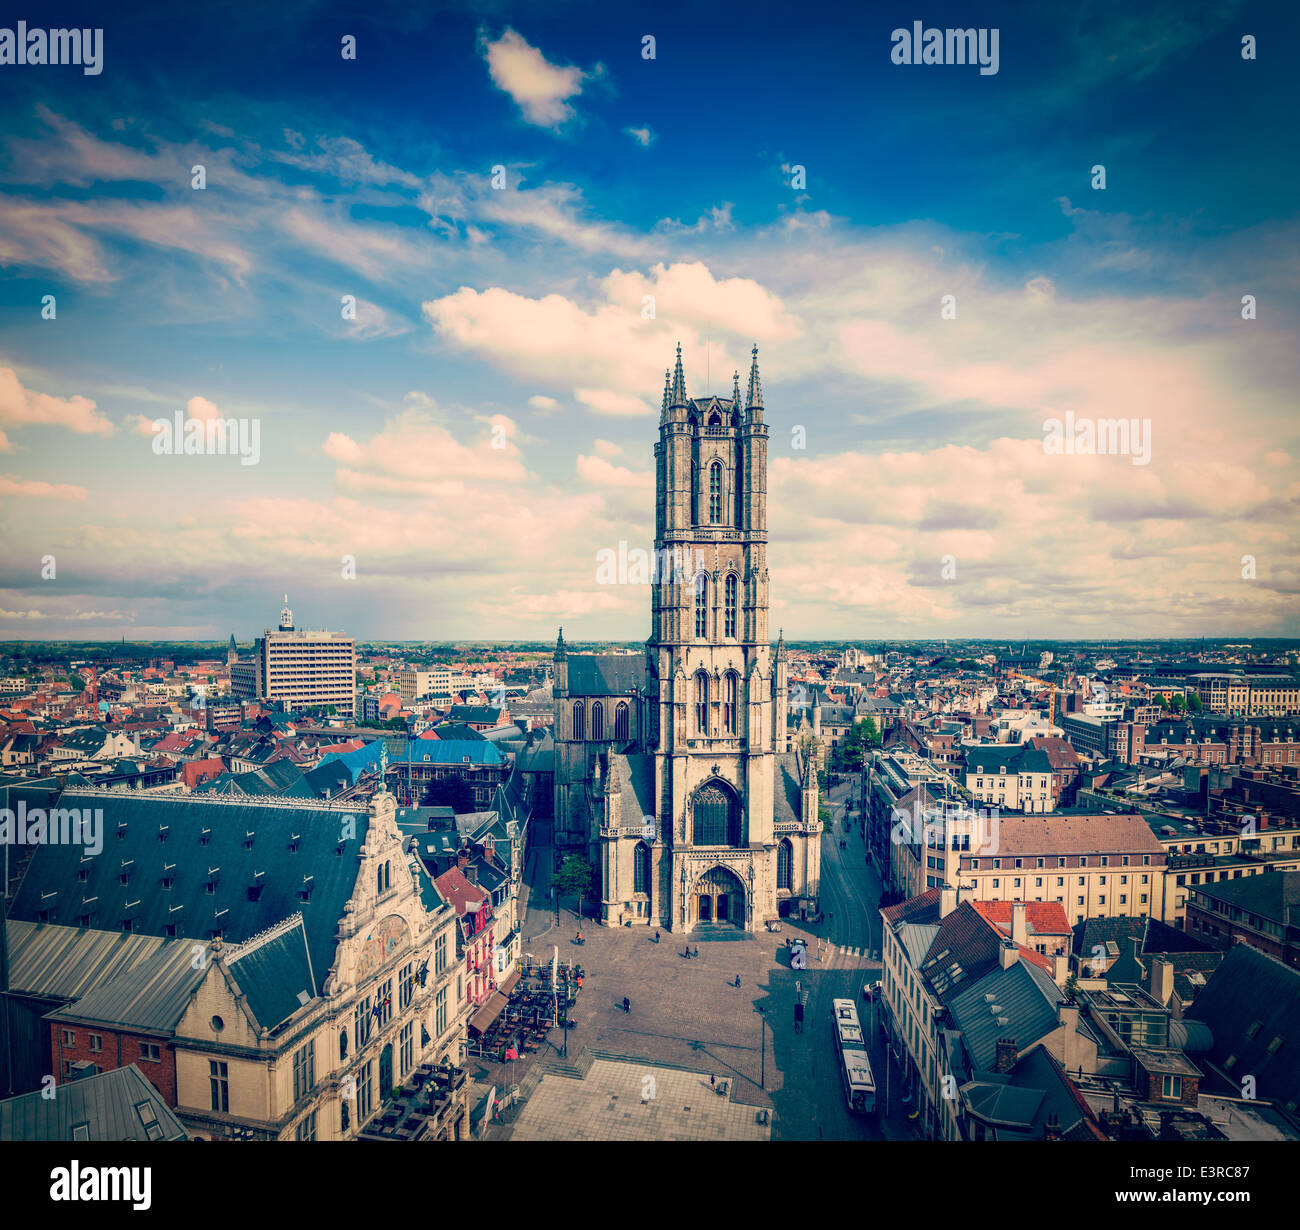 Vintage retro hipster style travel image of Saint Bavo Cathedral (Sint-Baafskathedraal) and Sint-Baafsplein, view from Belfry Stock Photo